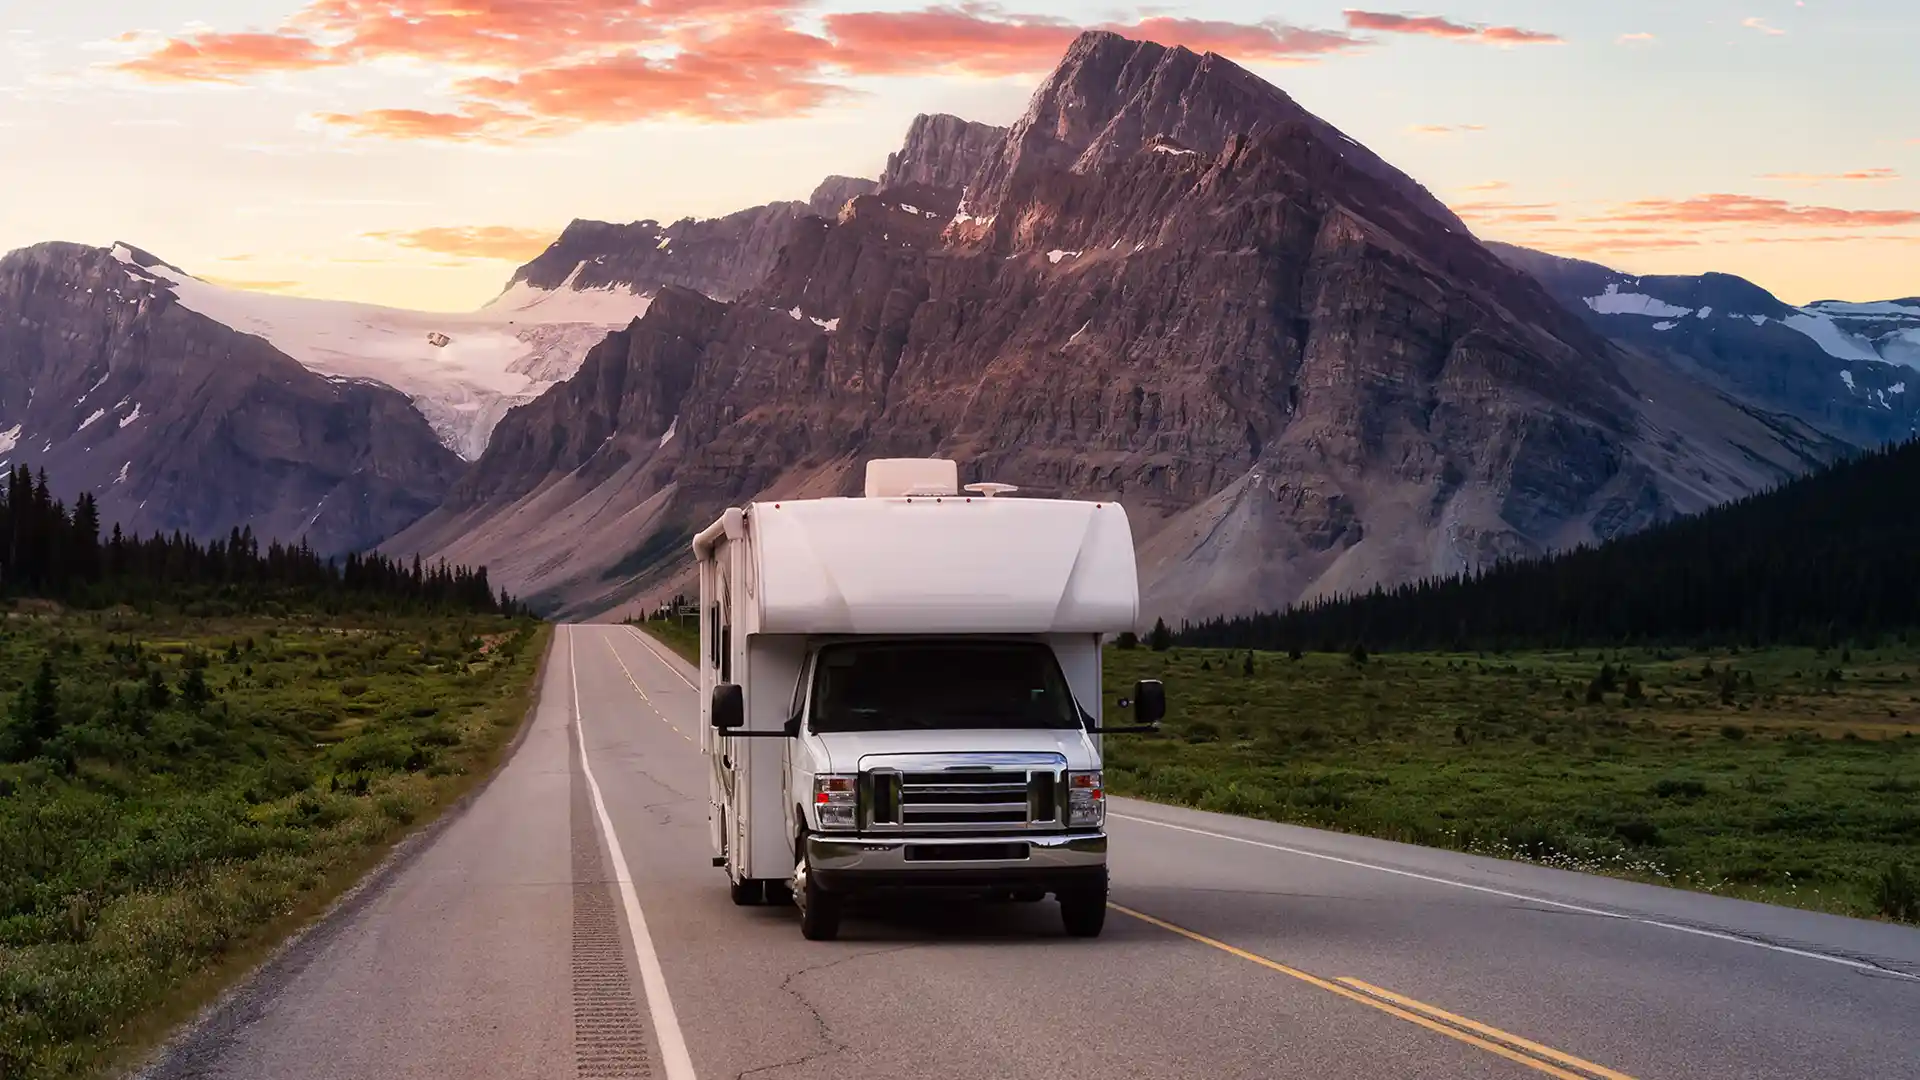 What To Look For When Choosing An RV Storage Facility